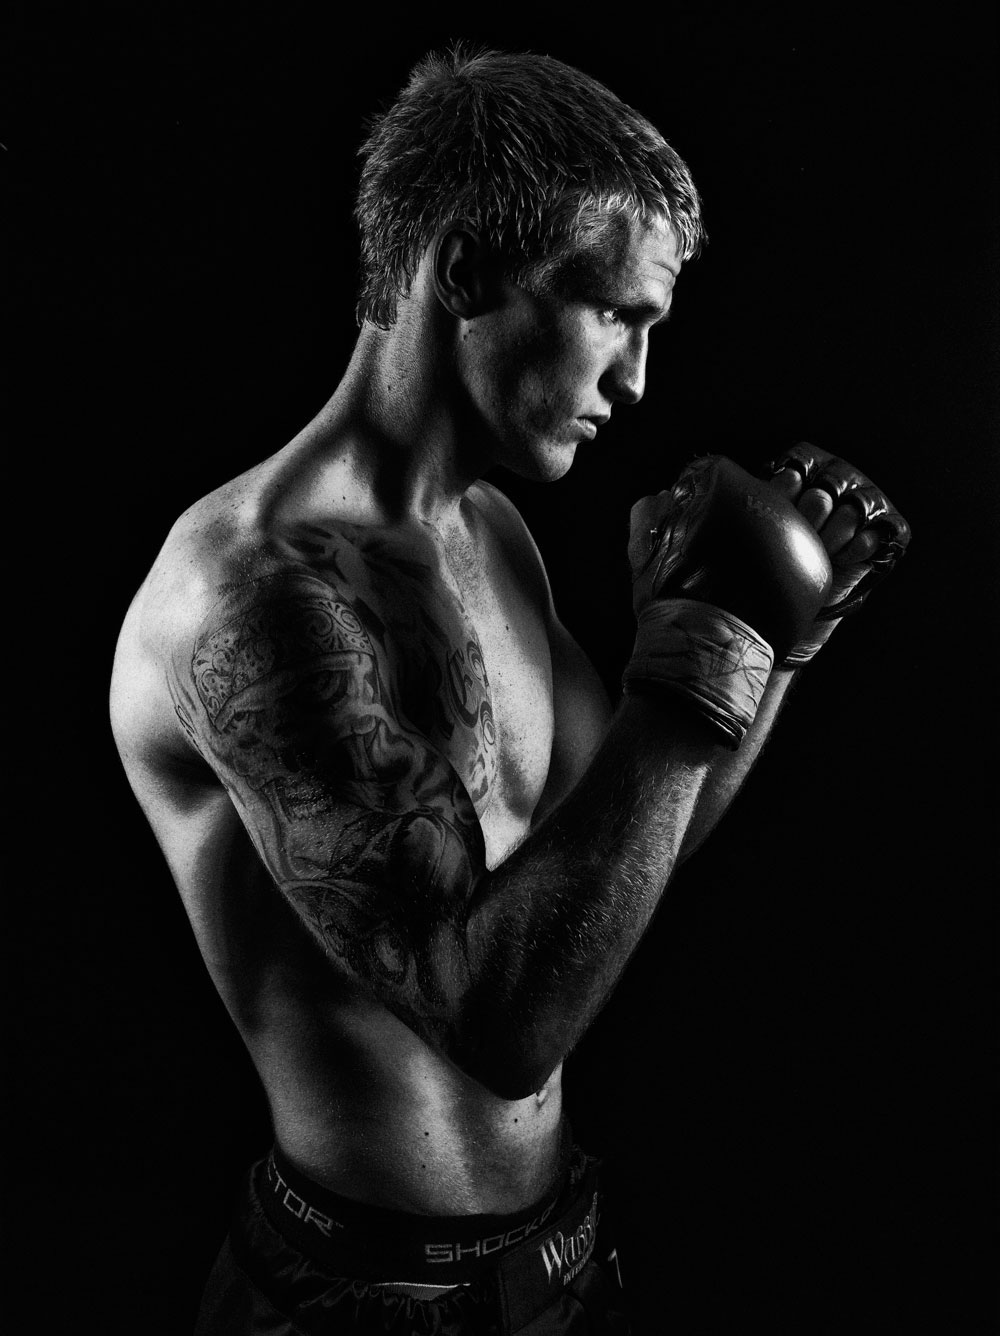 fight Boxing portrait black and white Portraiture Hasselblad digitial Martial Arts fight night fight club men male muscles sport